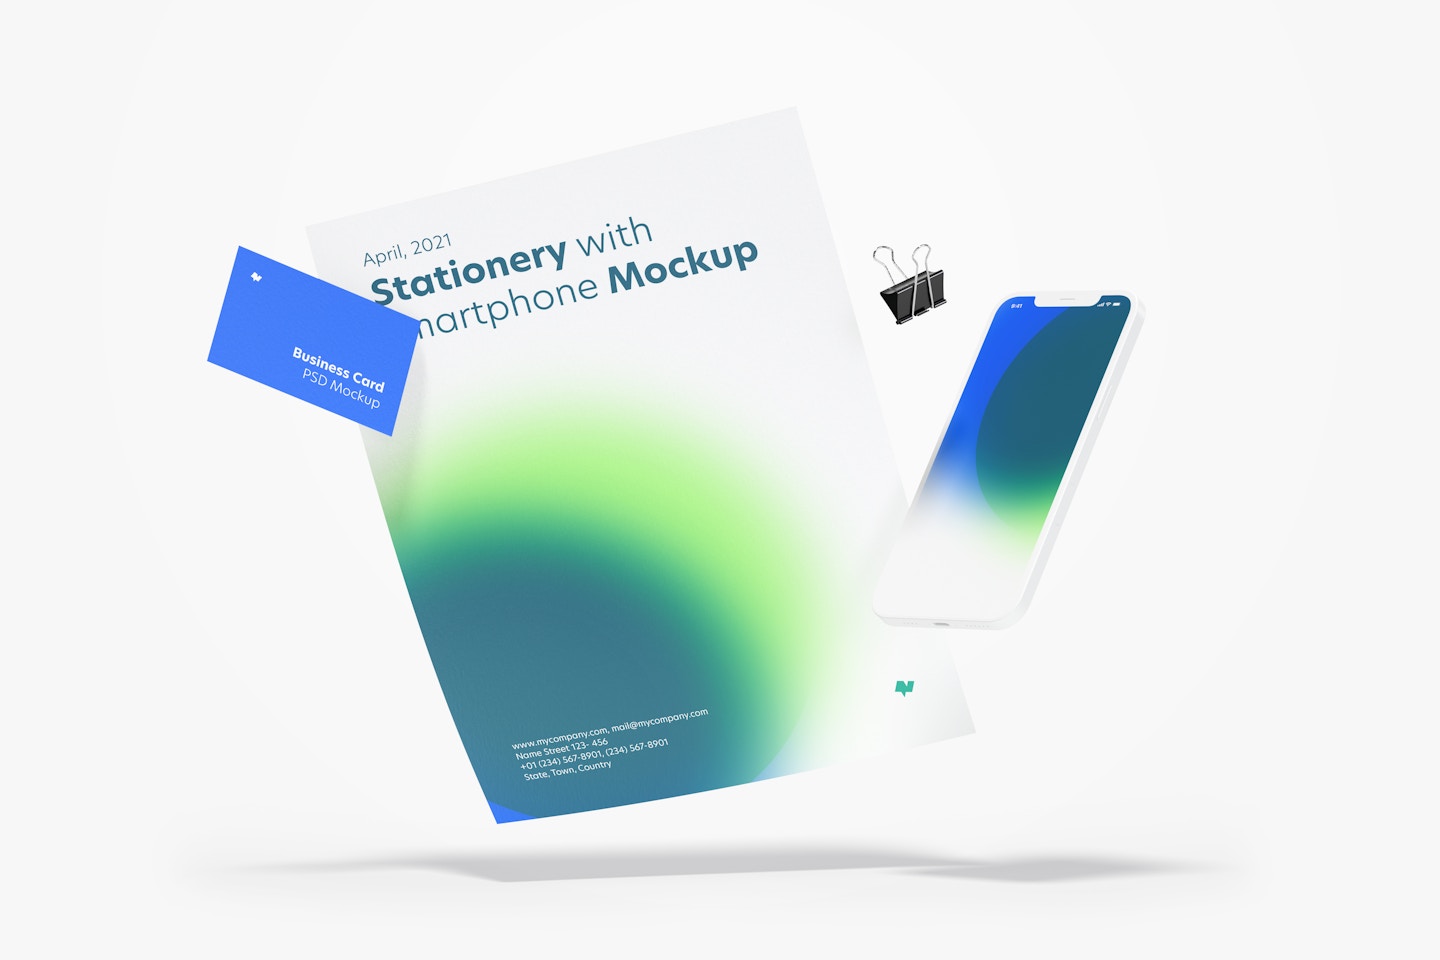 Stationery with Smartphone Mockup, Floating